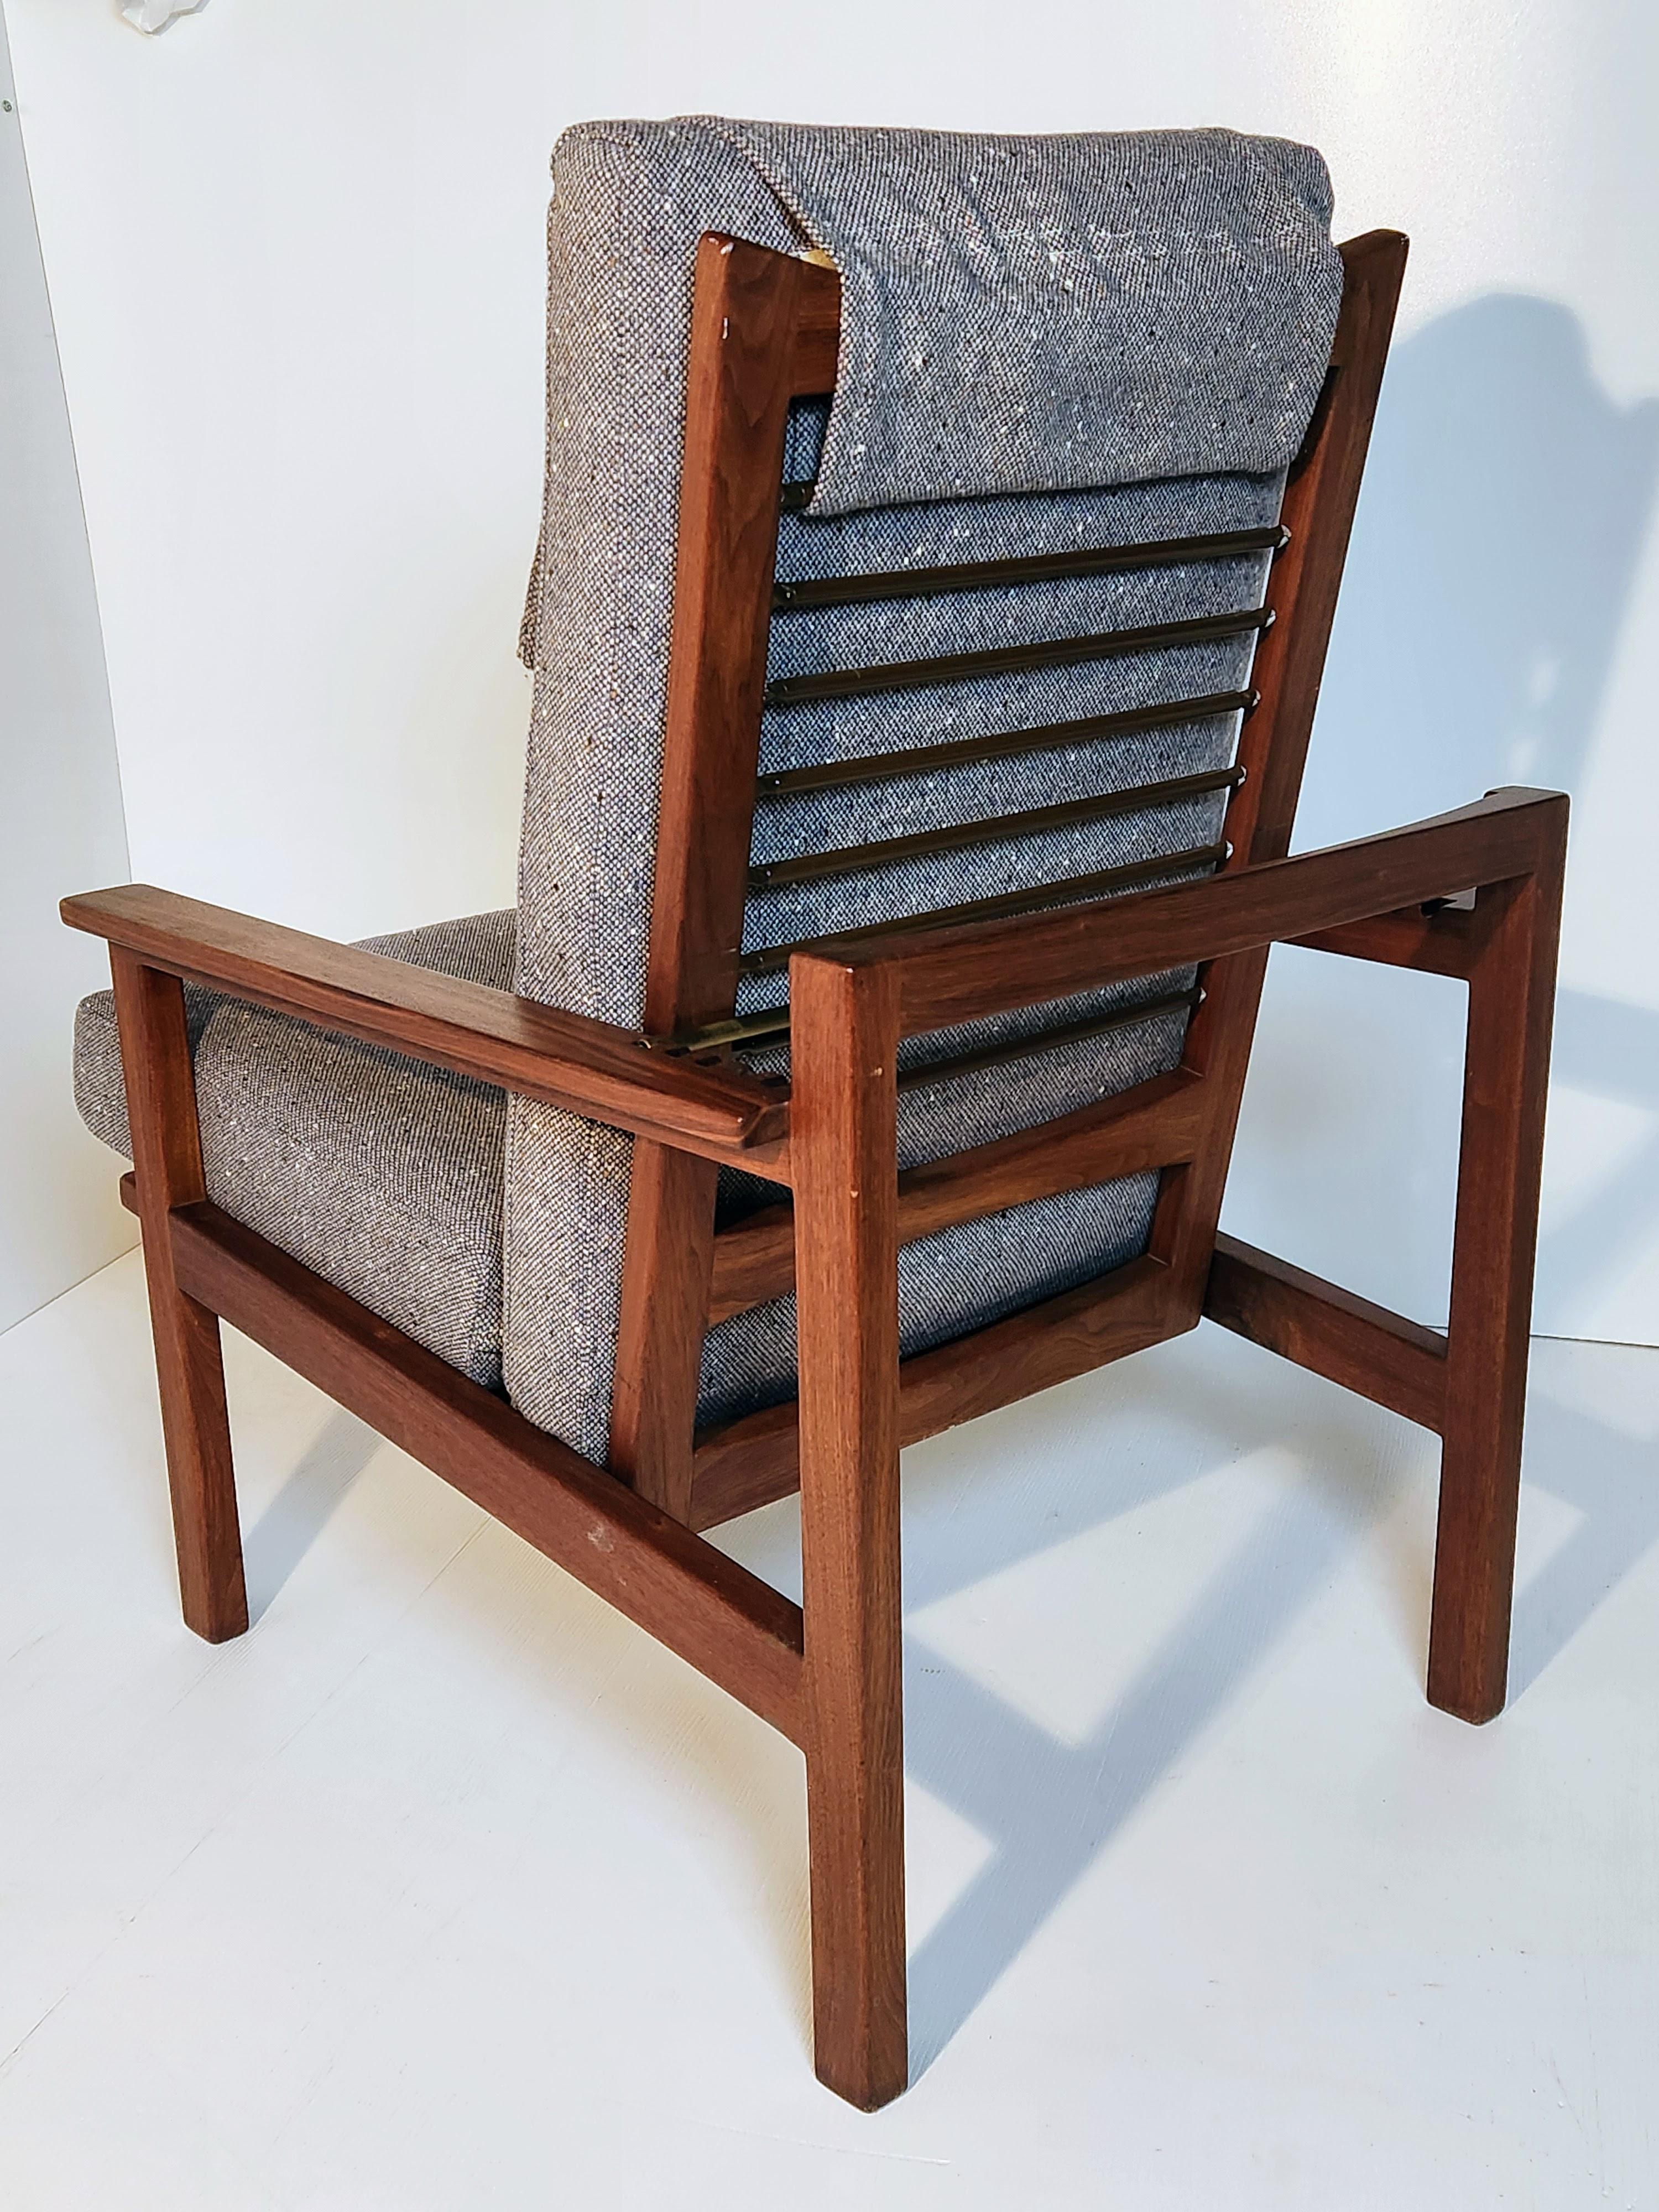 Walnut Adjustable Lounge Chair Arden Riddle (1921-2011) pre-1965 For Sale 1